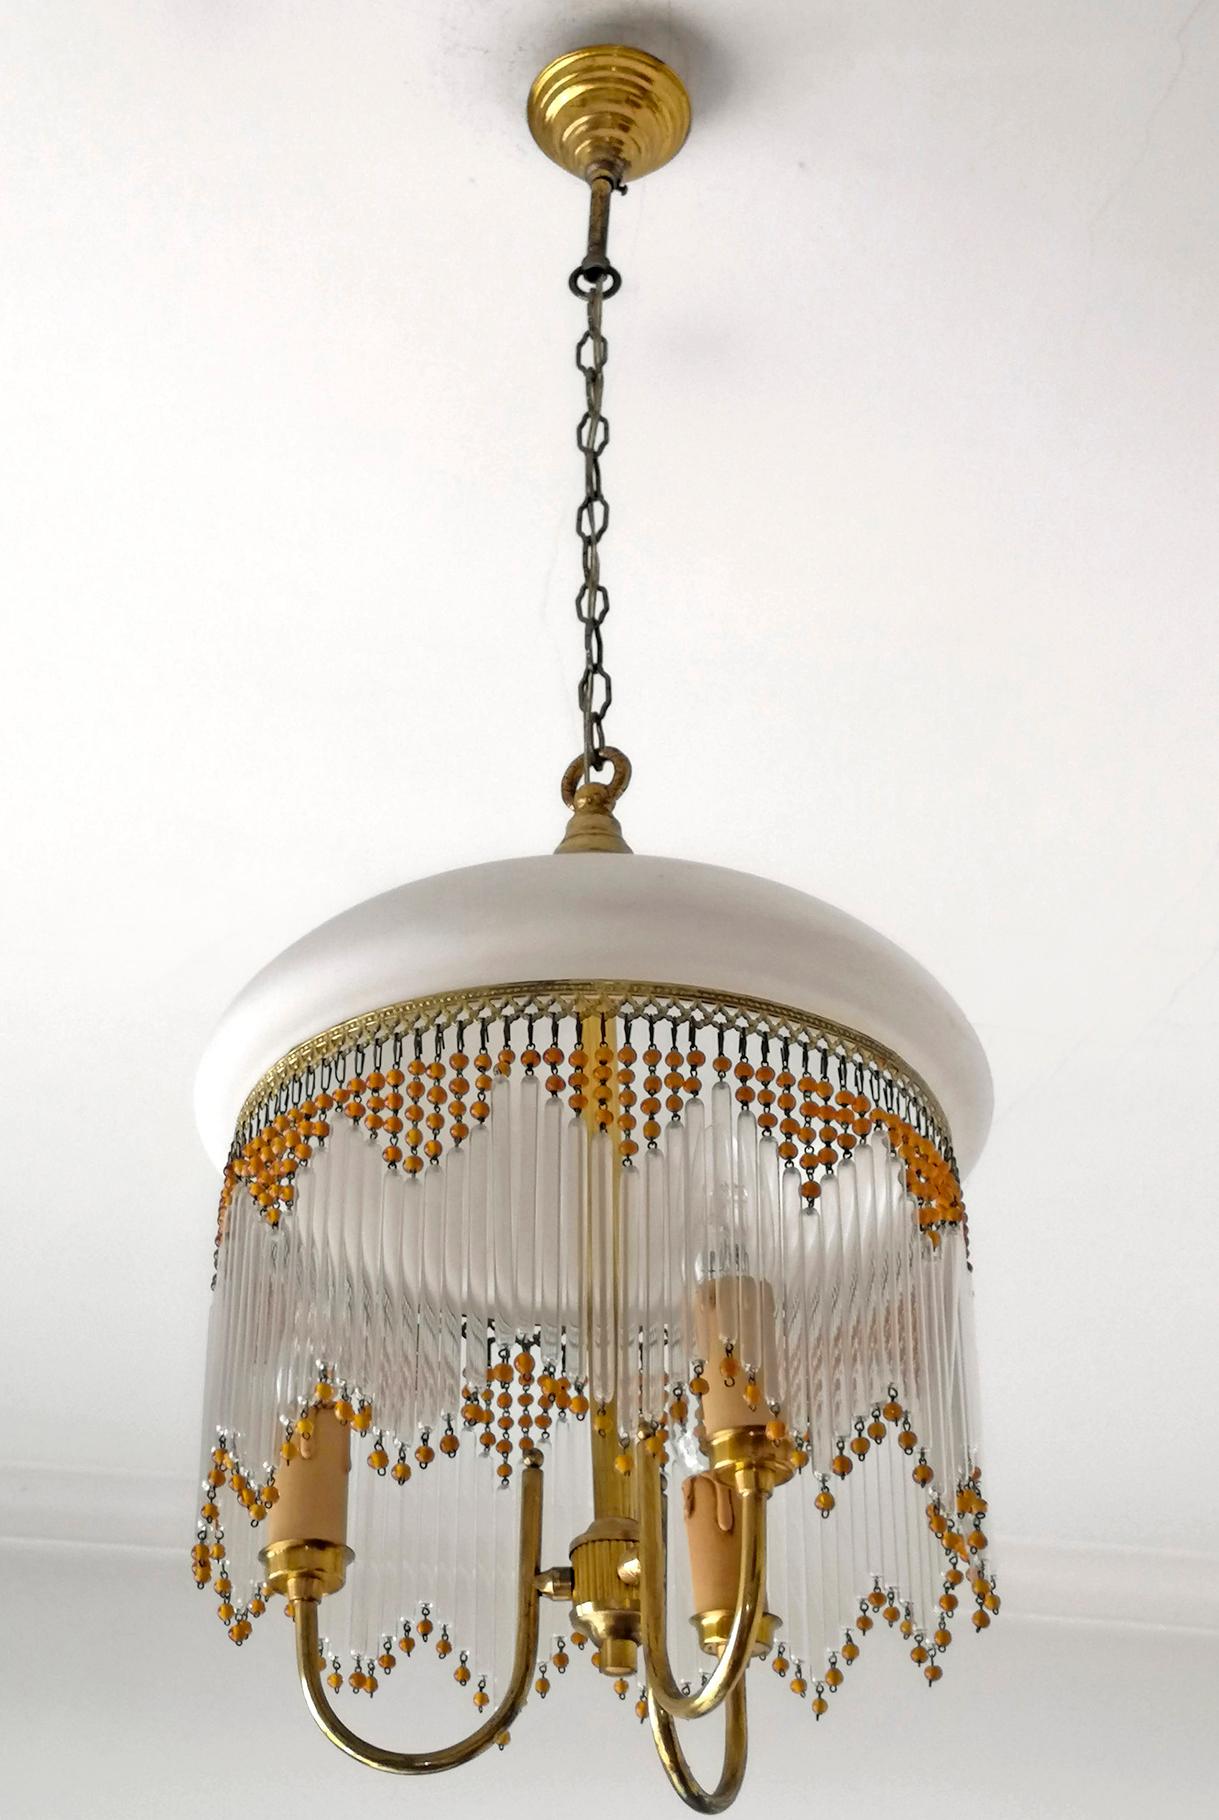 Italian Art Deco & Art Nouveau Amber Beaded Clear Glass Fringe Murano Chandelier In Good Condition For Sale In Coimbra, PT